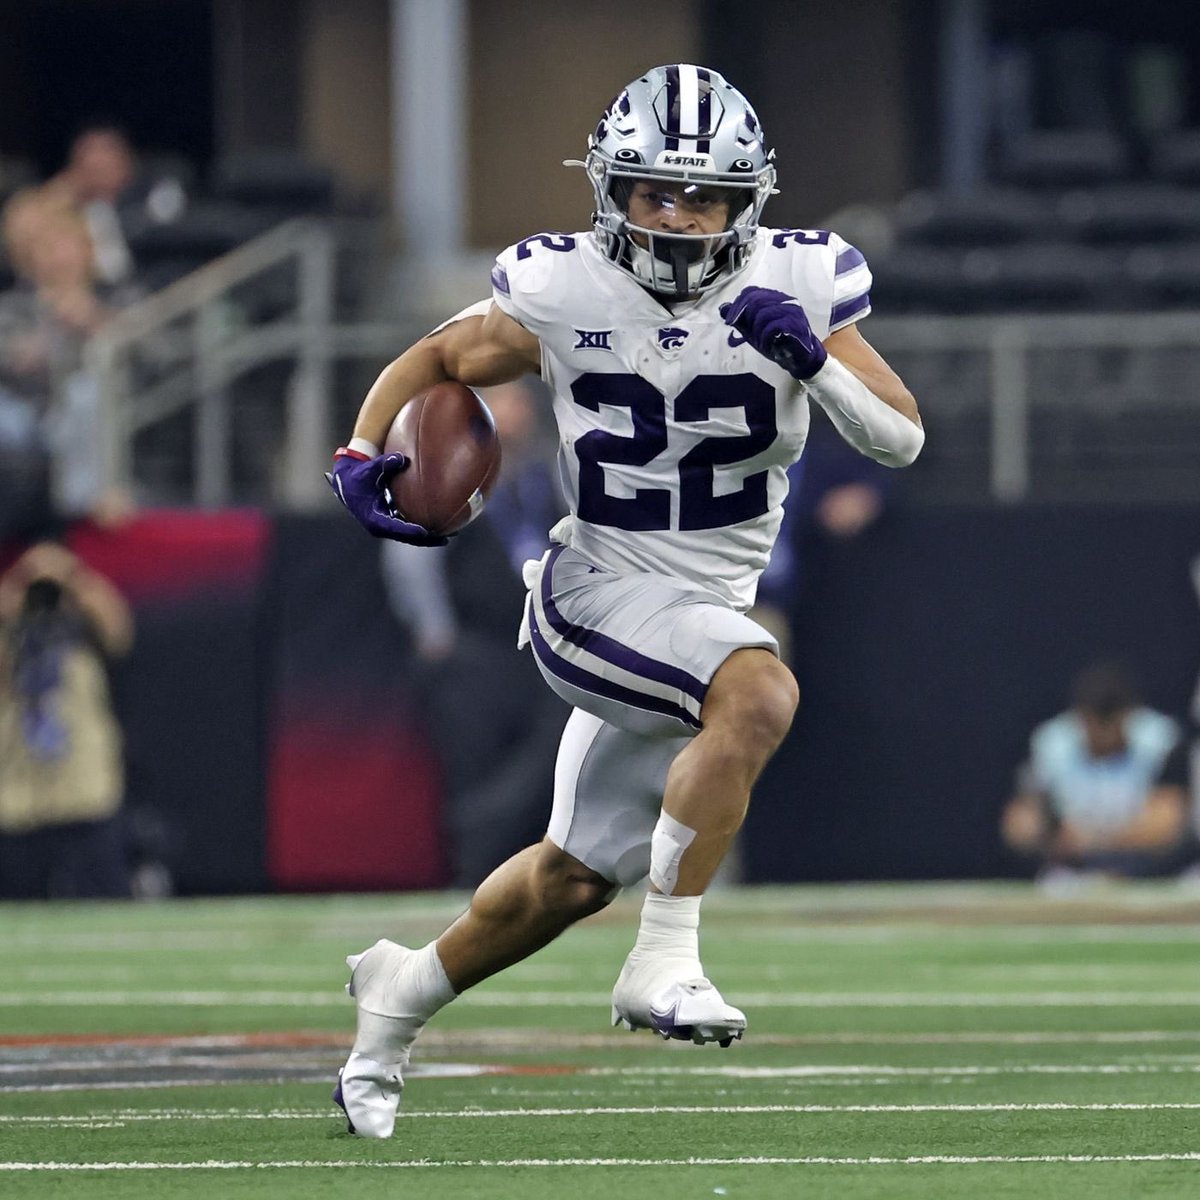 After an amazing conversation with @CoachKli, I am blessed to say I have received an offer from Kansas State University! 🟣⚪️#EMAW #AGTG @FortOFootball @CoachMdtwnBrown @QuincyTillmon @s_atagi @AllenTrieu